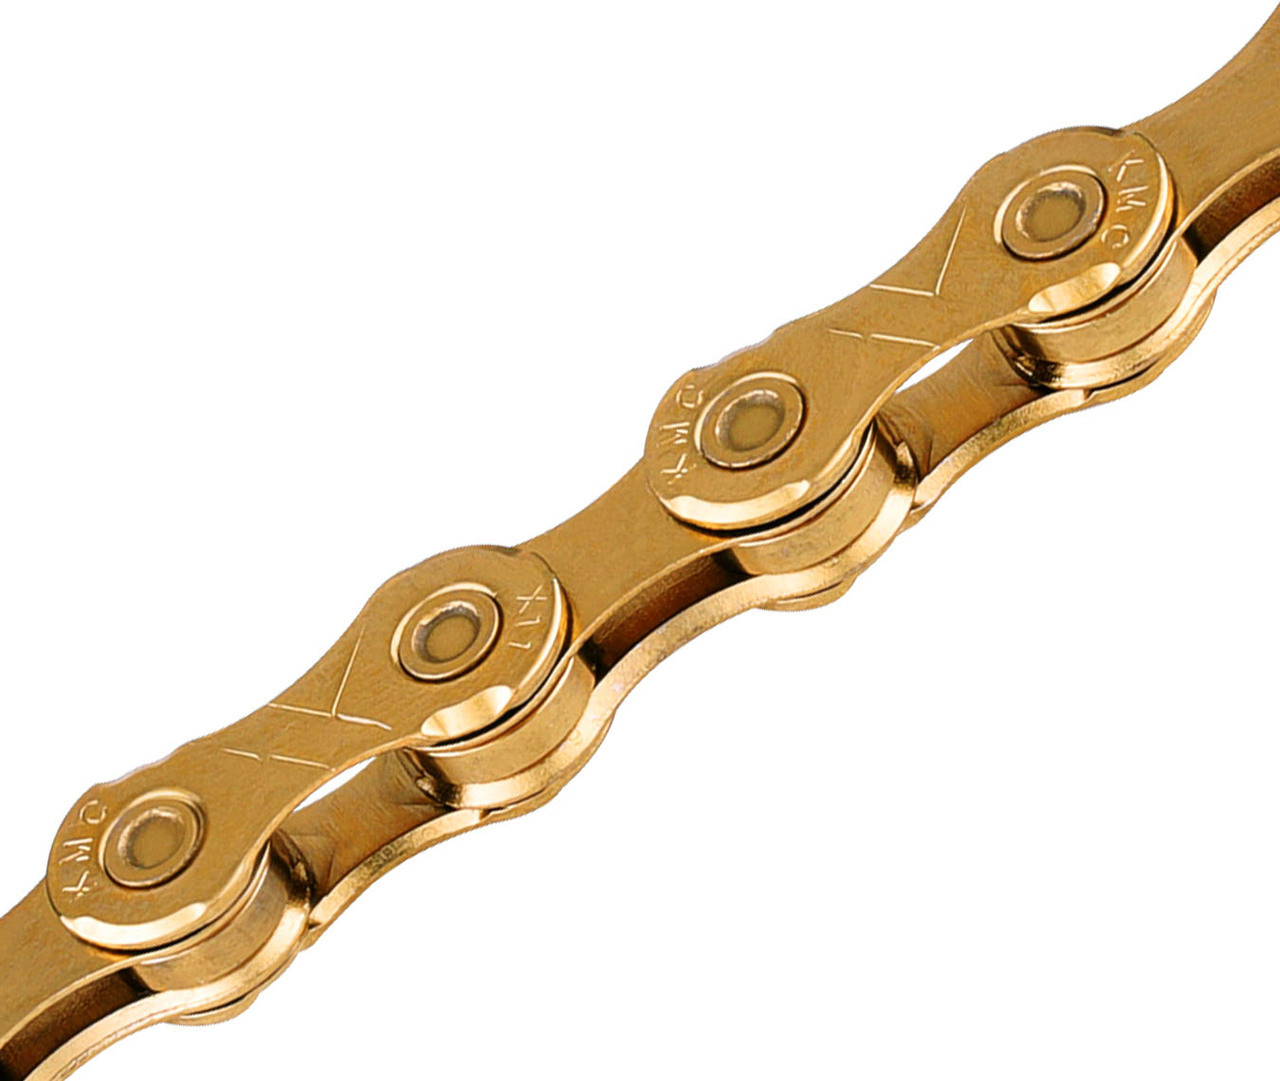 10-Speed 116 Links KMC X10 Chain Gold 